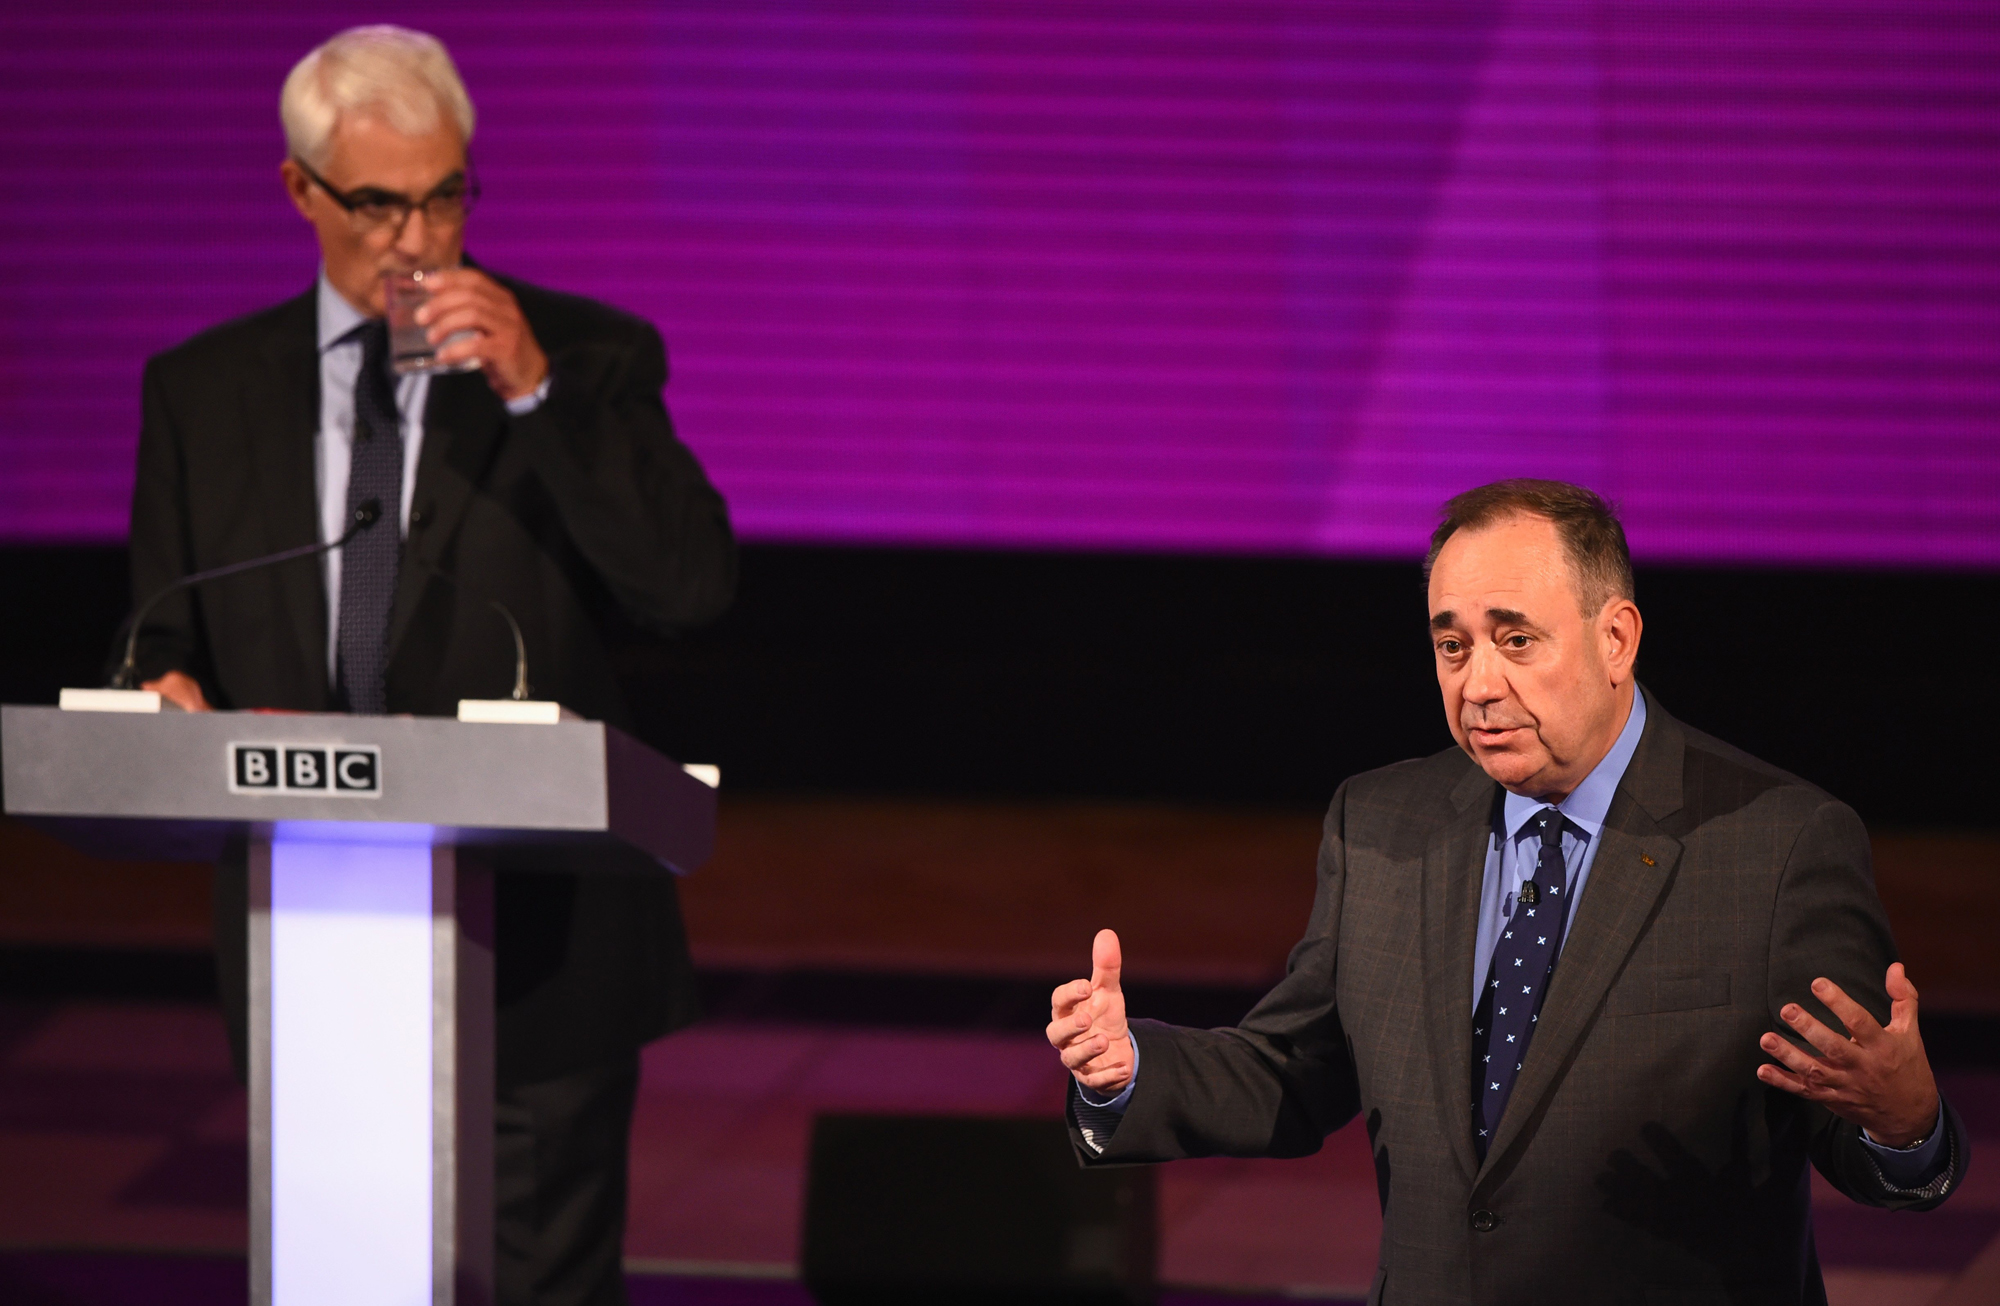 Alex Salmond, First Minister of Scotland and Alistair Darling, chairman of Better Together, take part in a live television debate by the BBC in the Kelvingrove Art Galleries on Aug. 25, 2014 in Glasgow, Scotland.